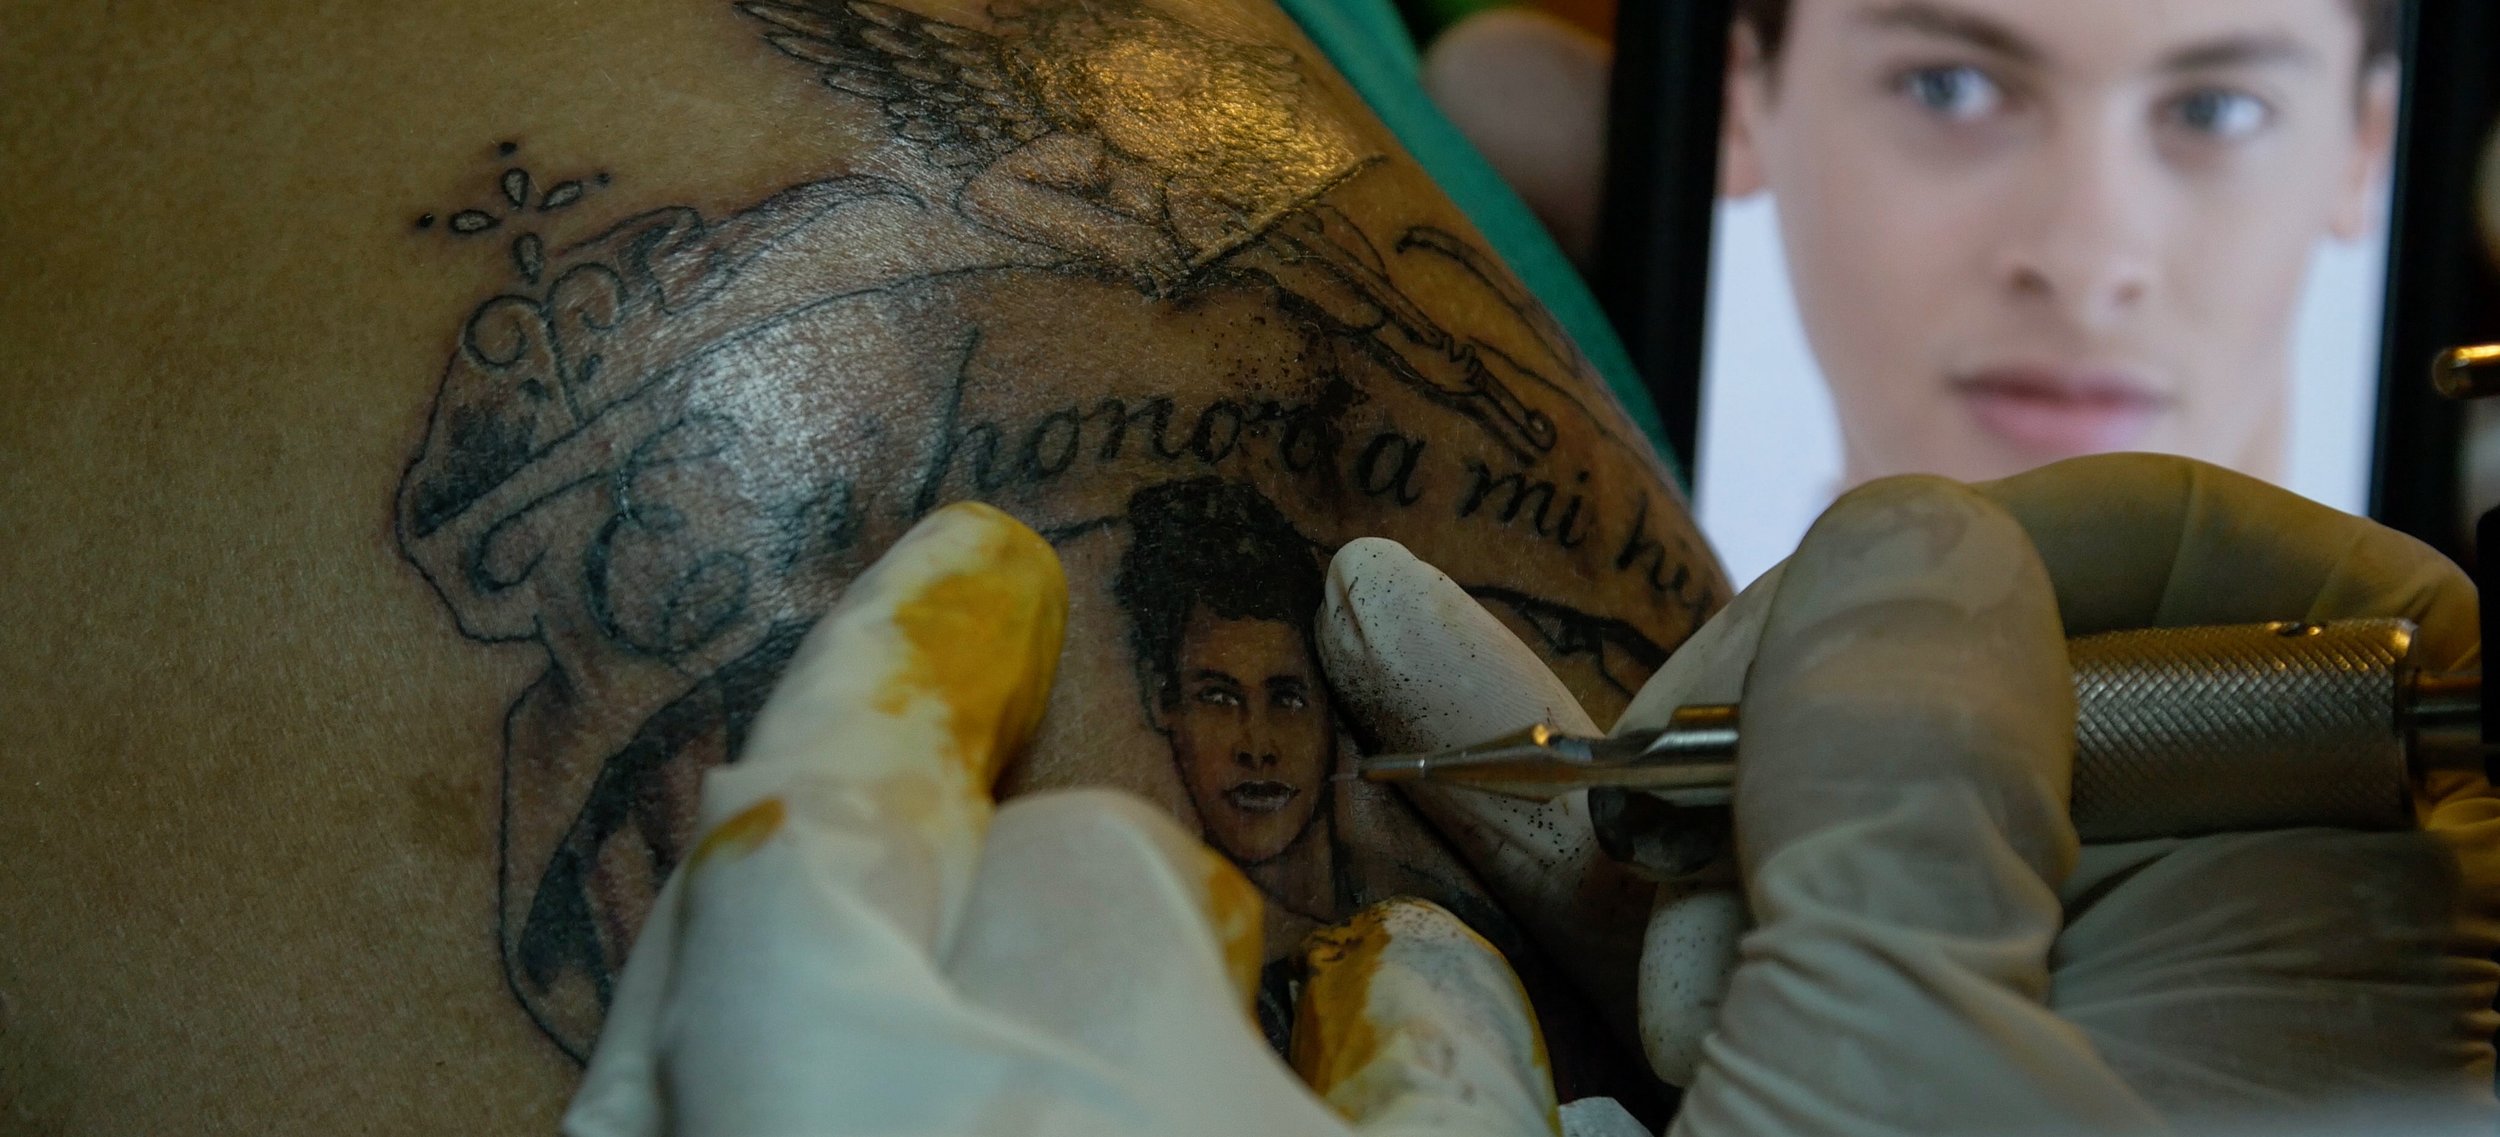 Tattoo of Alexis of his father © Indyca.jpeg